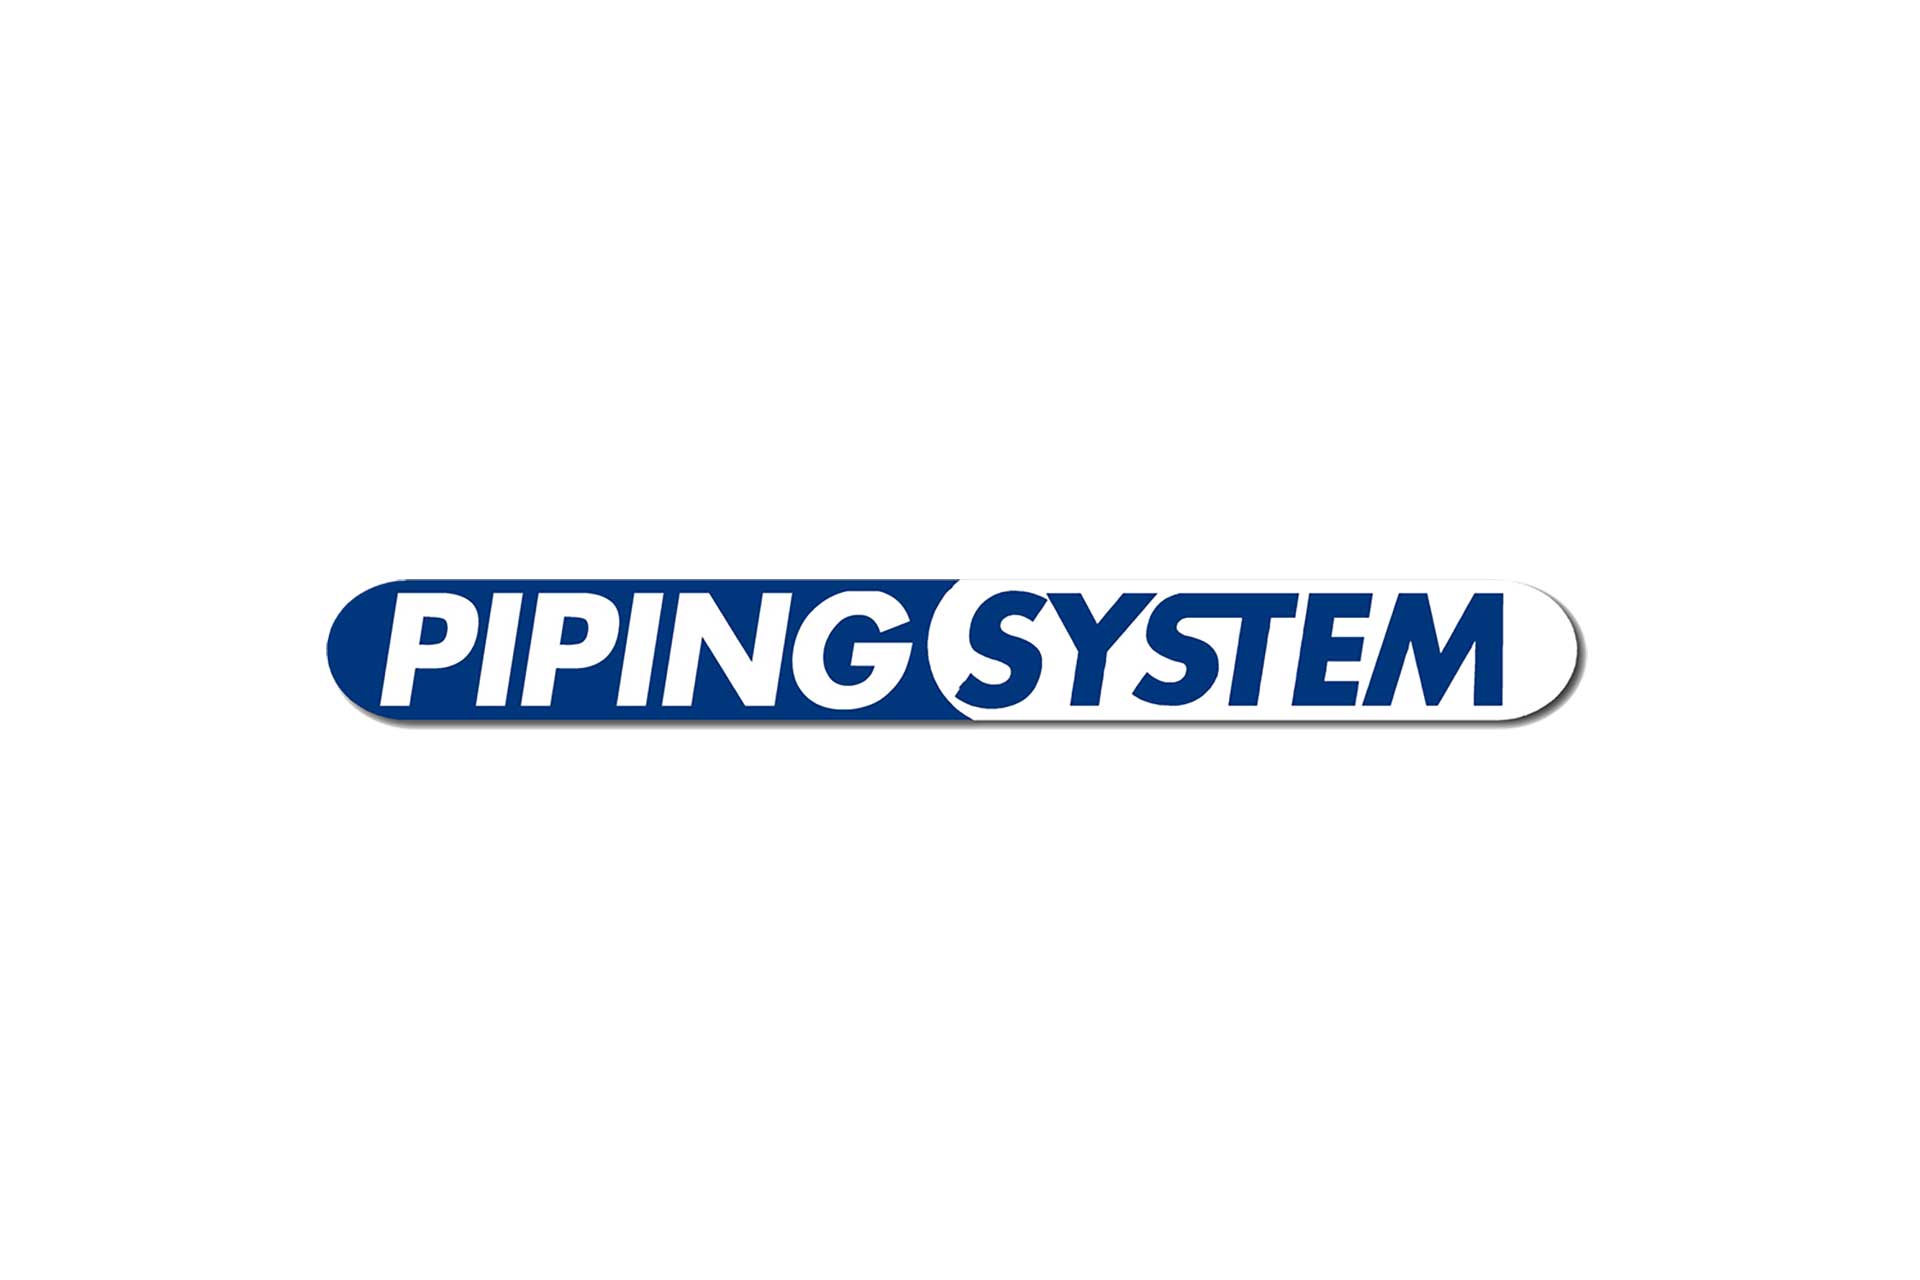 Logo Piping System Indonesia